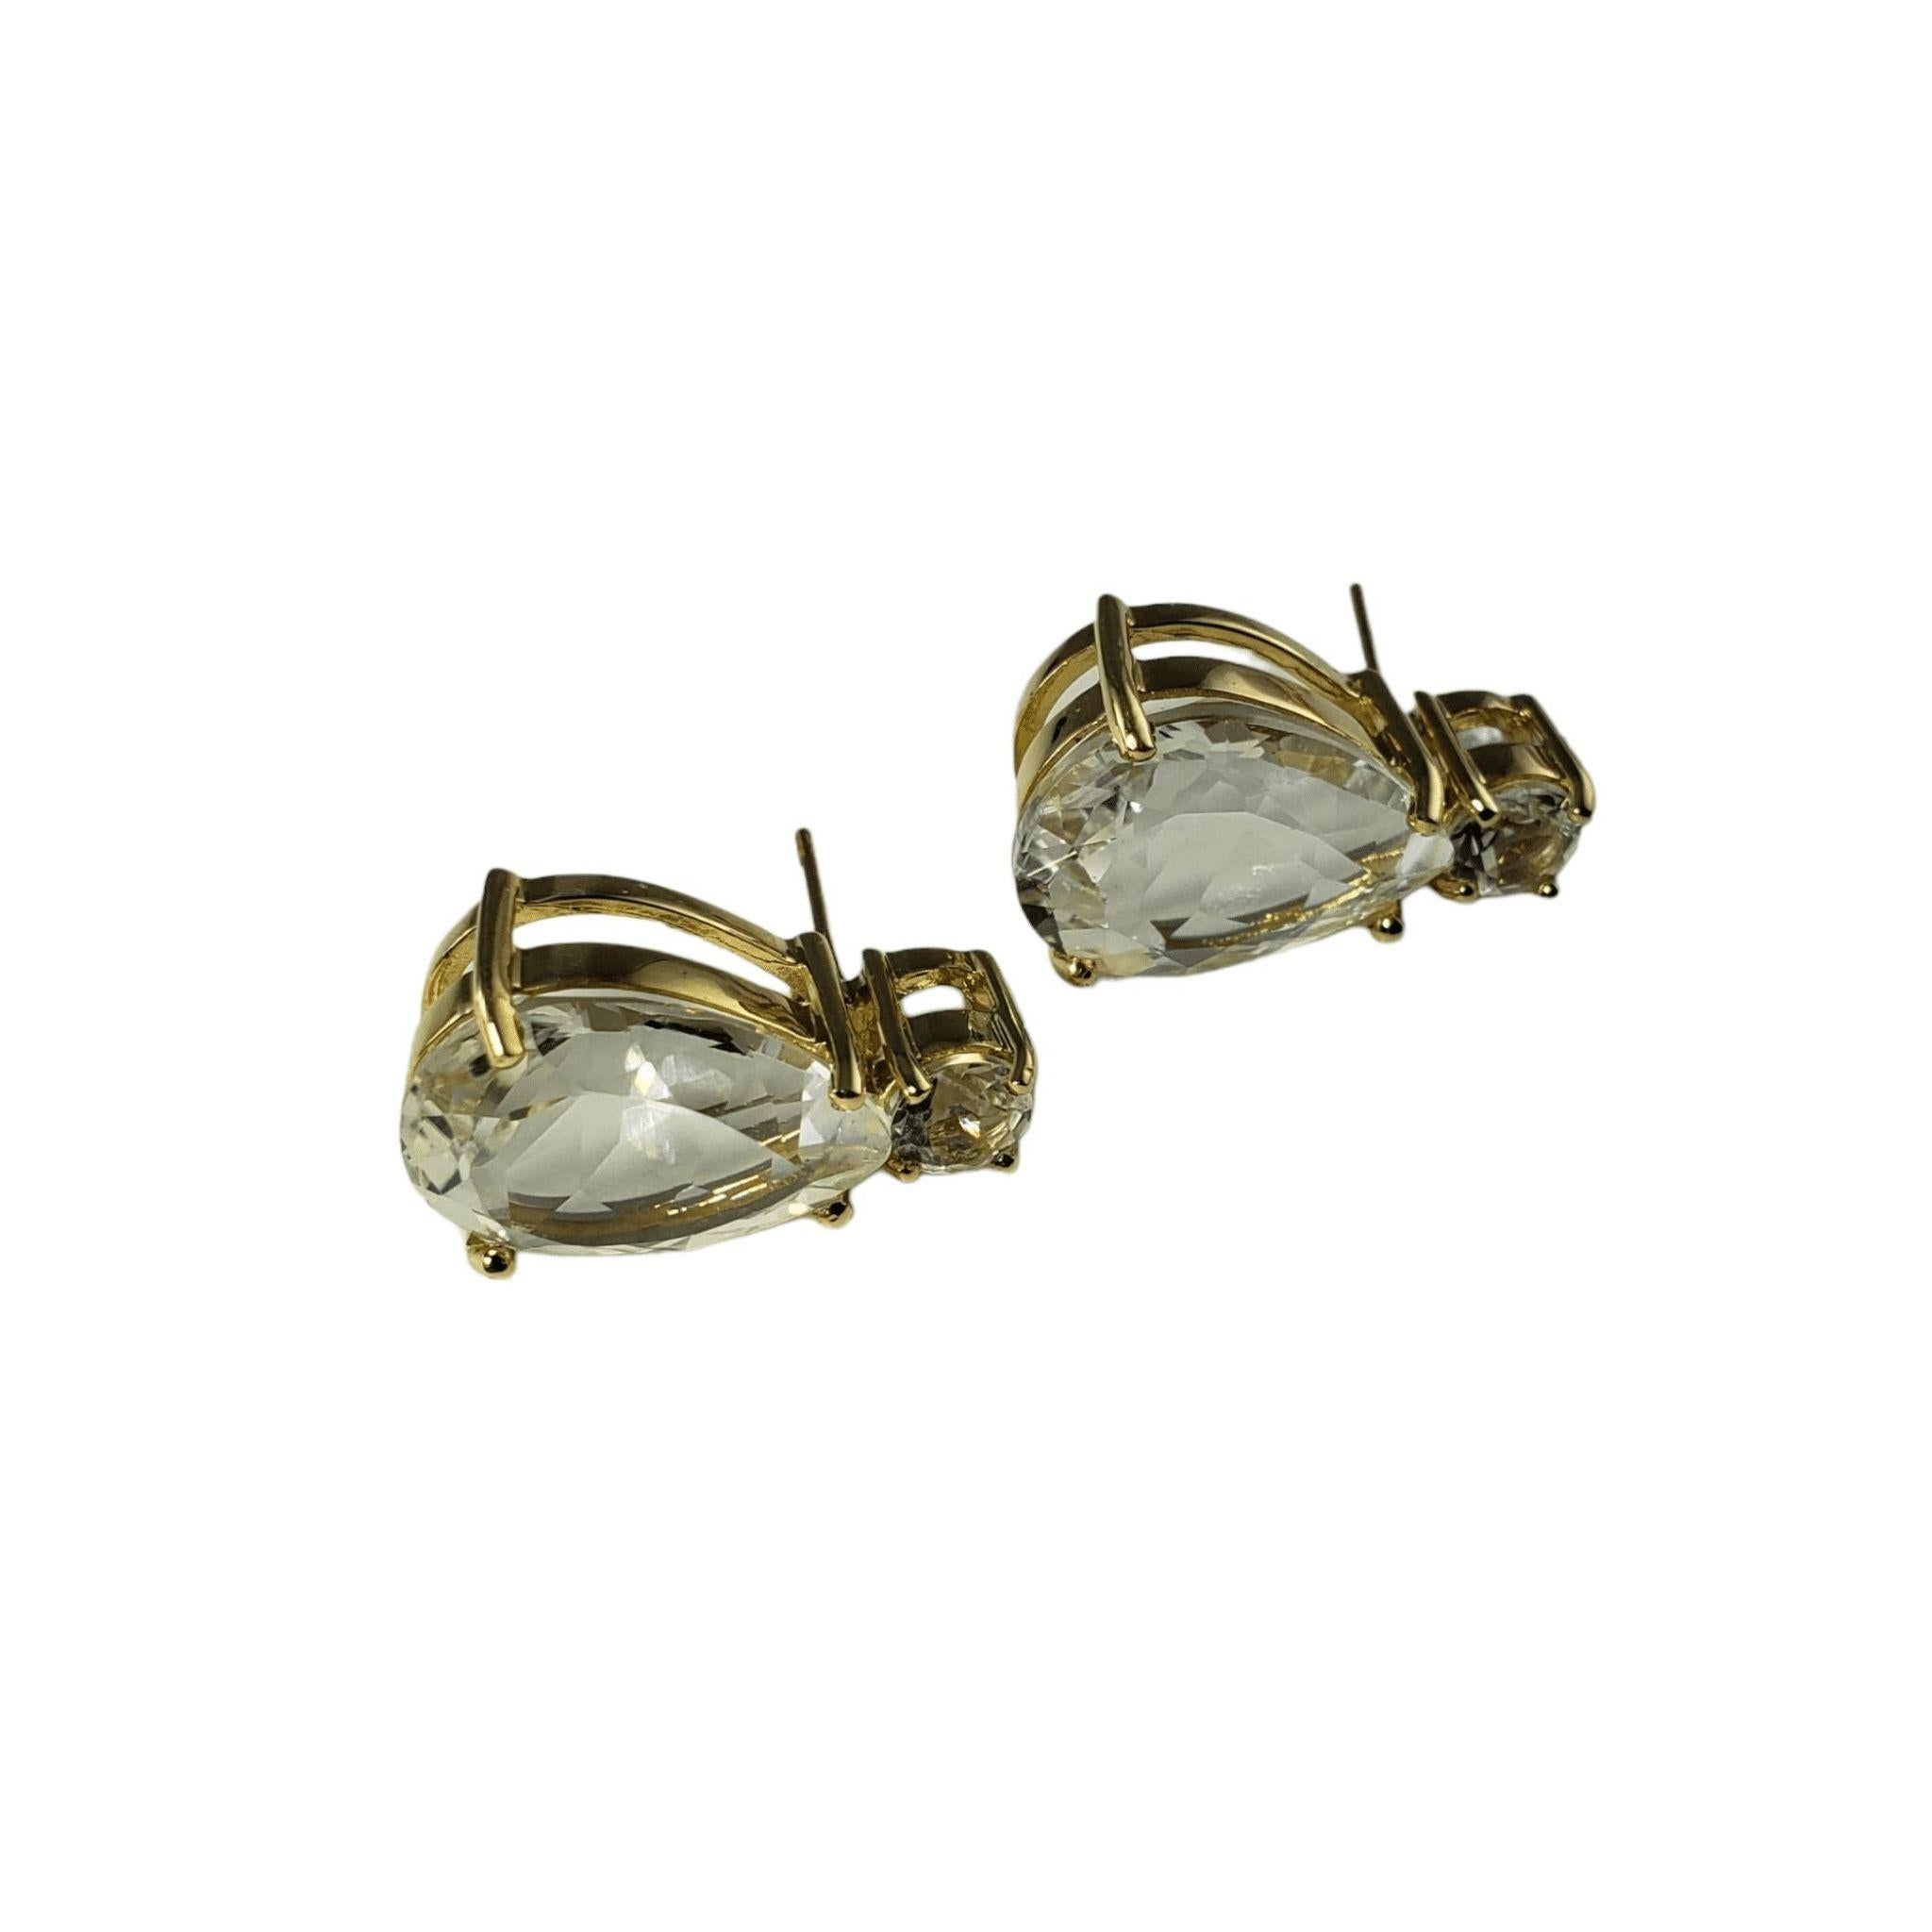 10 Karat Yellow Gold and White Topaz Earrings #13696 In Good Condition For Sale In Washington Depot, CT